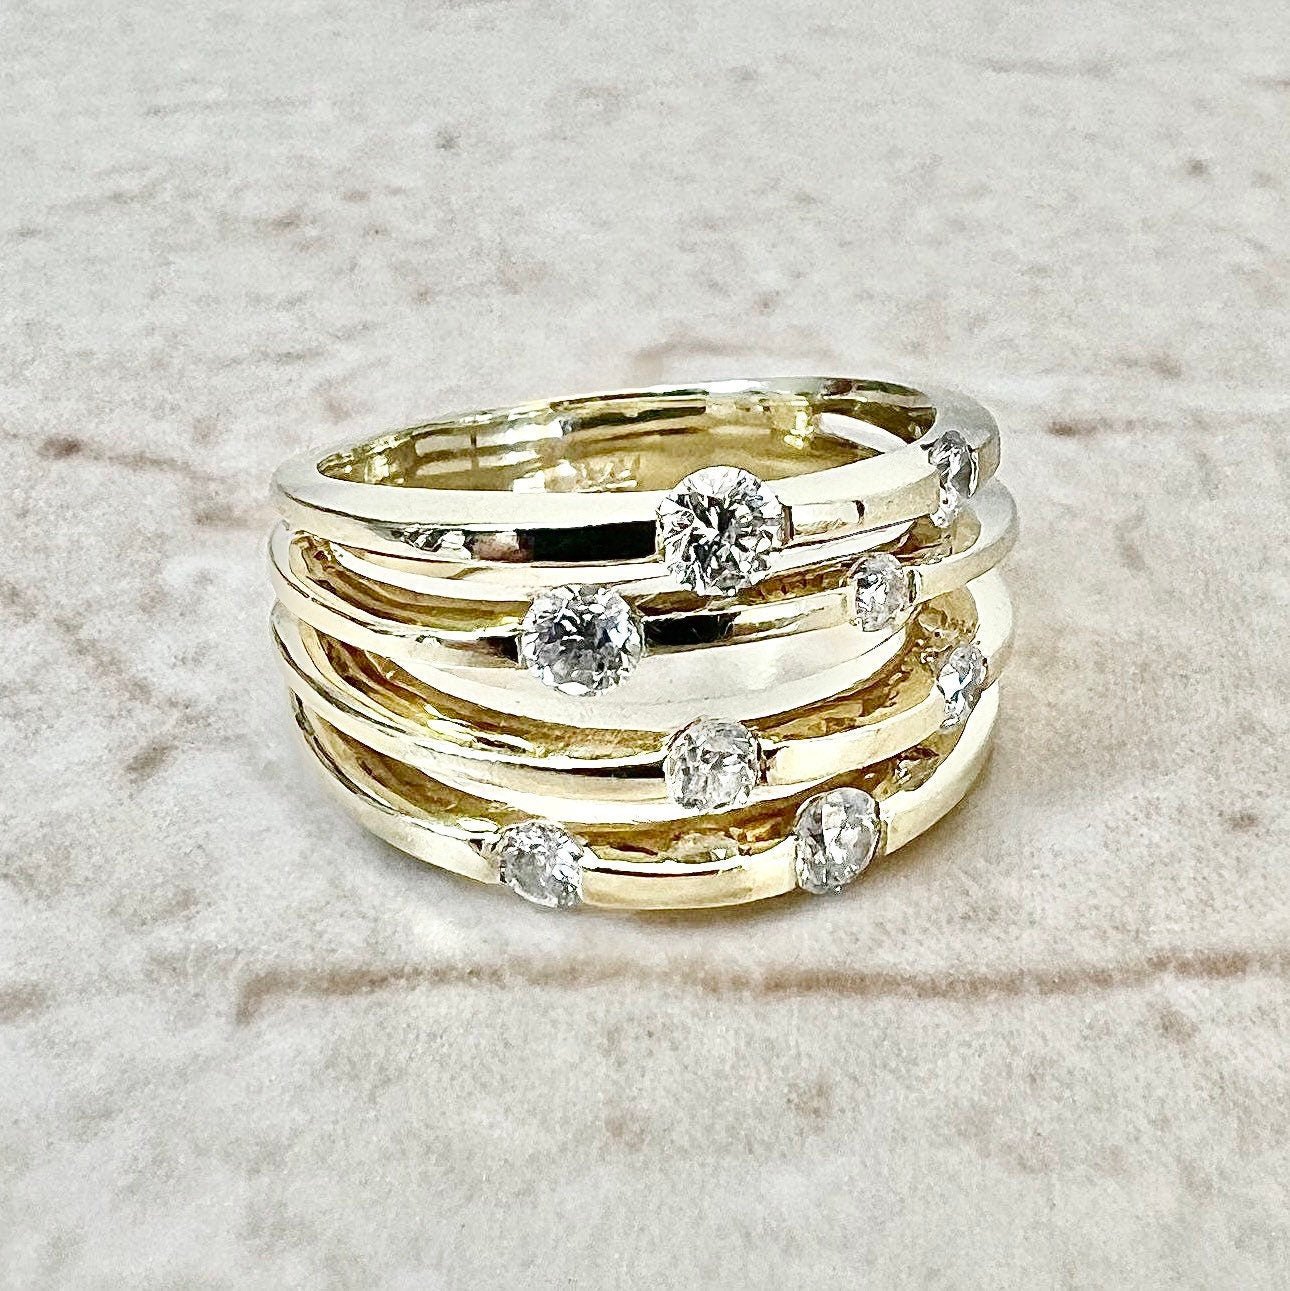 Vintage 14K Diamond Cocktail Band Ring - Yellow Gold Diamond Ring - Wedding Ring - Birthday Gift - Best Gift For Her - Anniversary Ring